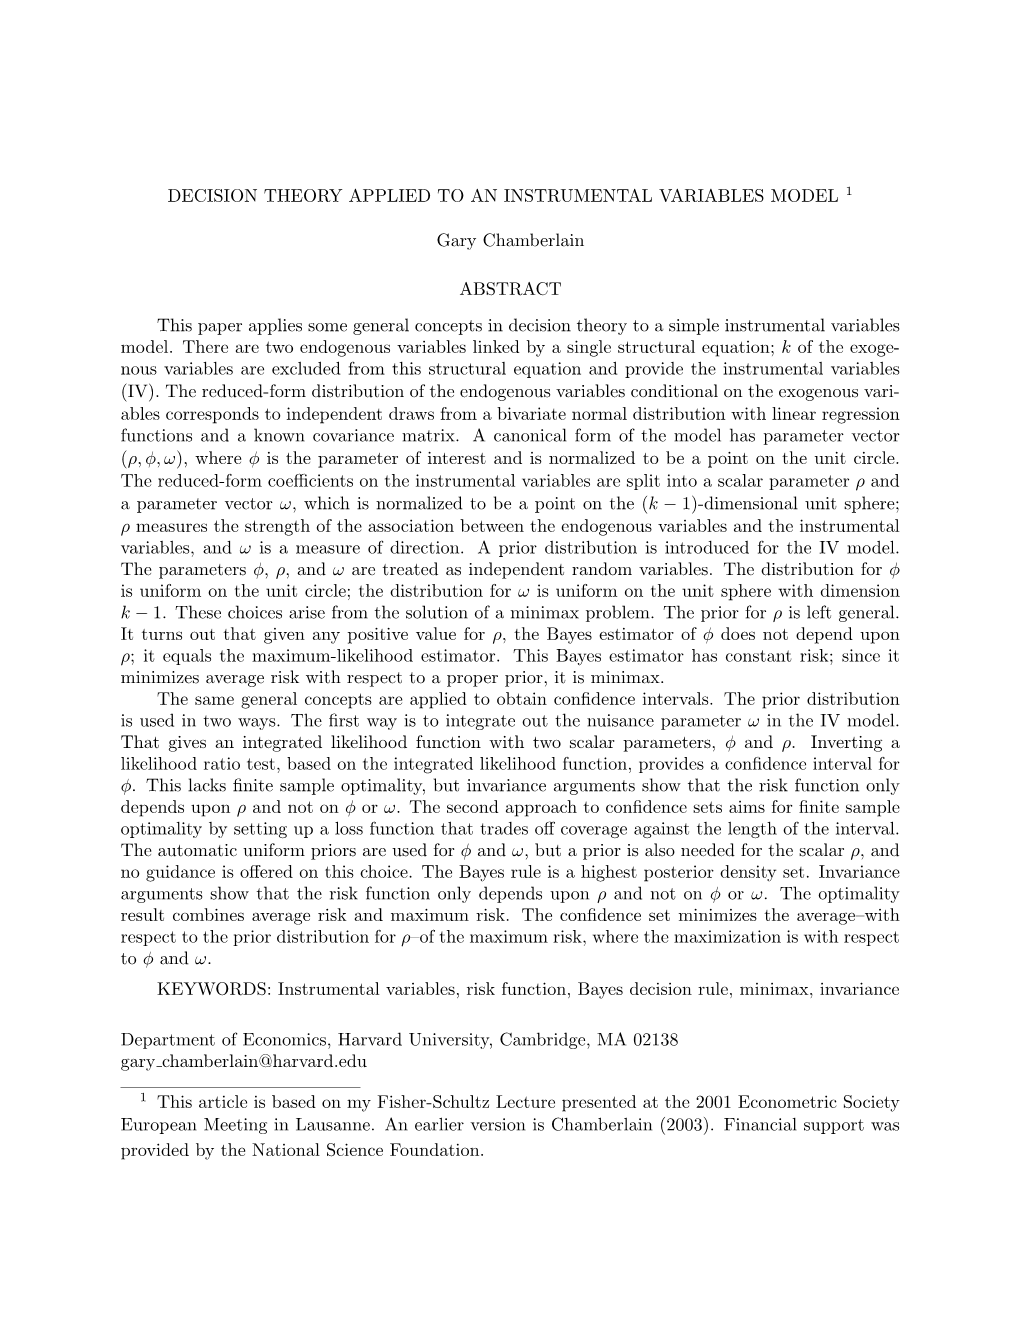 DECISION THEORY APPLIED to an INSTRUMENTAL VARIABLES MODEL 1 Gary Chamberlain ABSTRACT This Paper Applies Some General Concepts